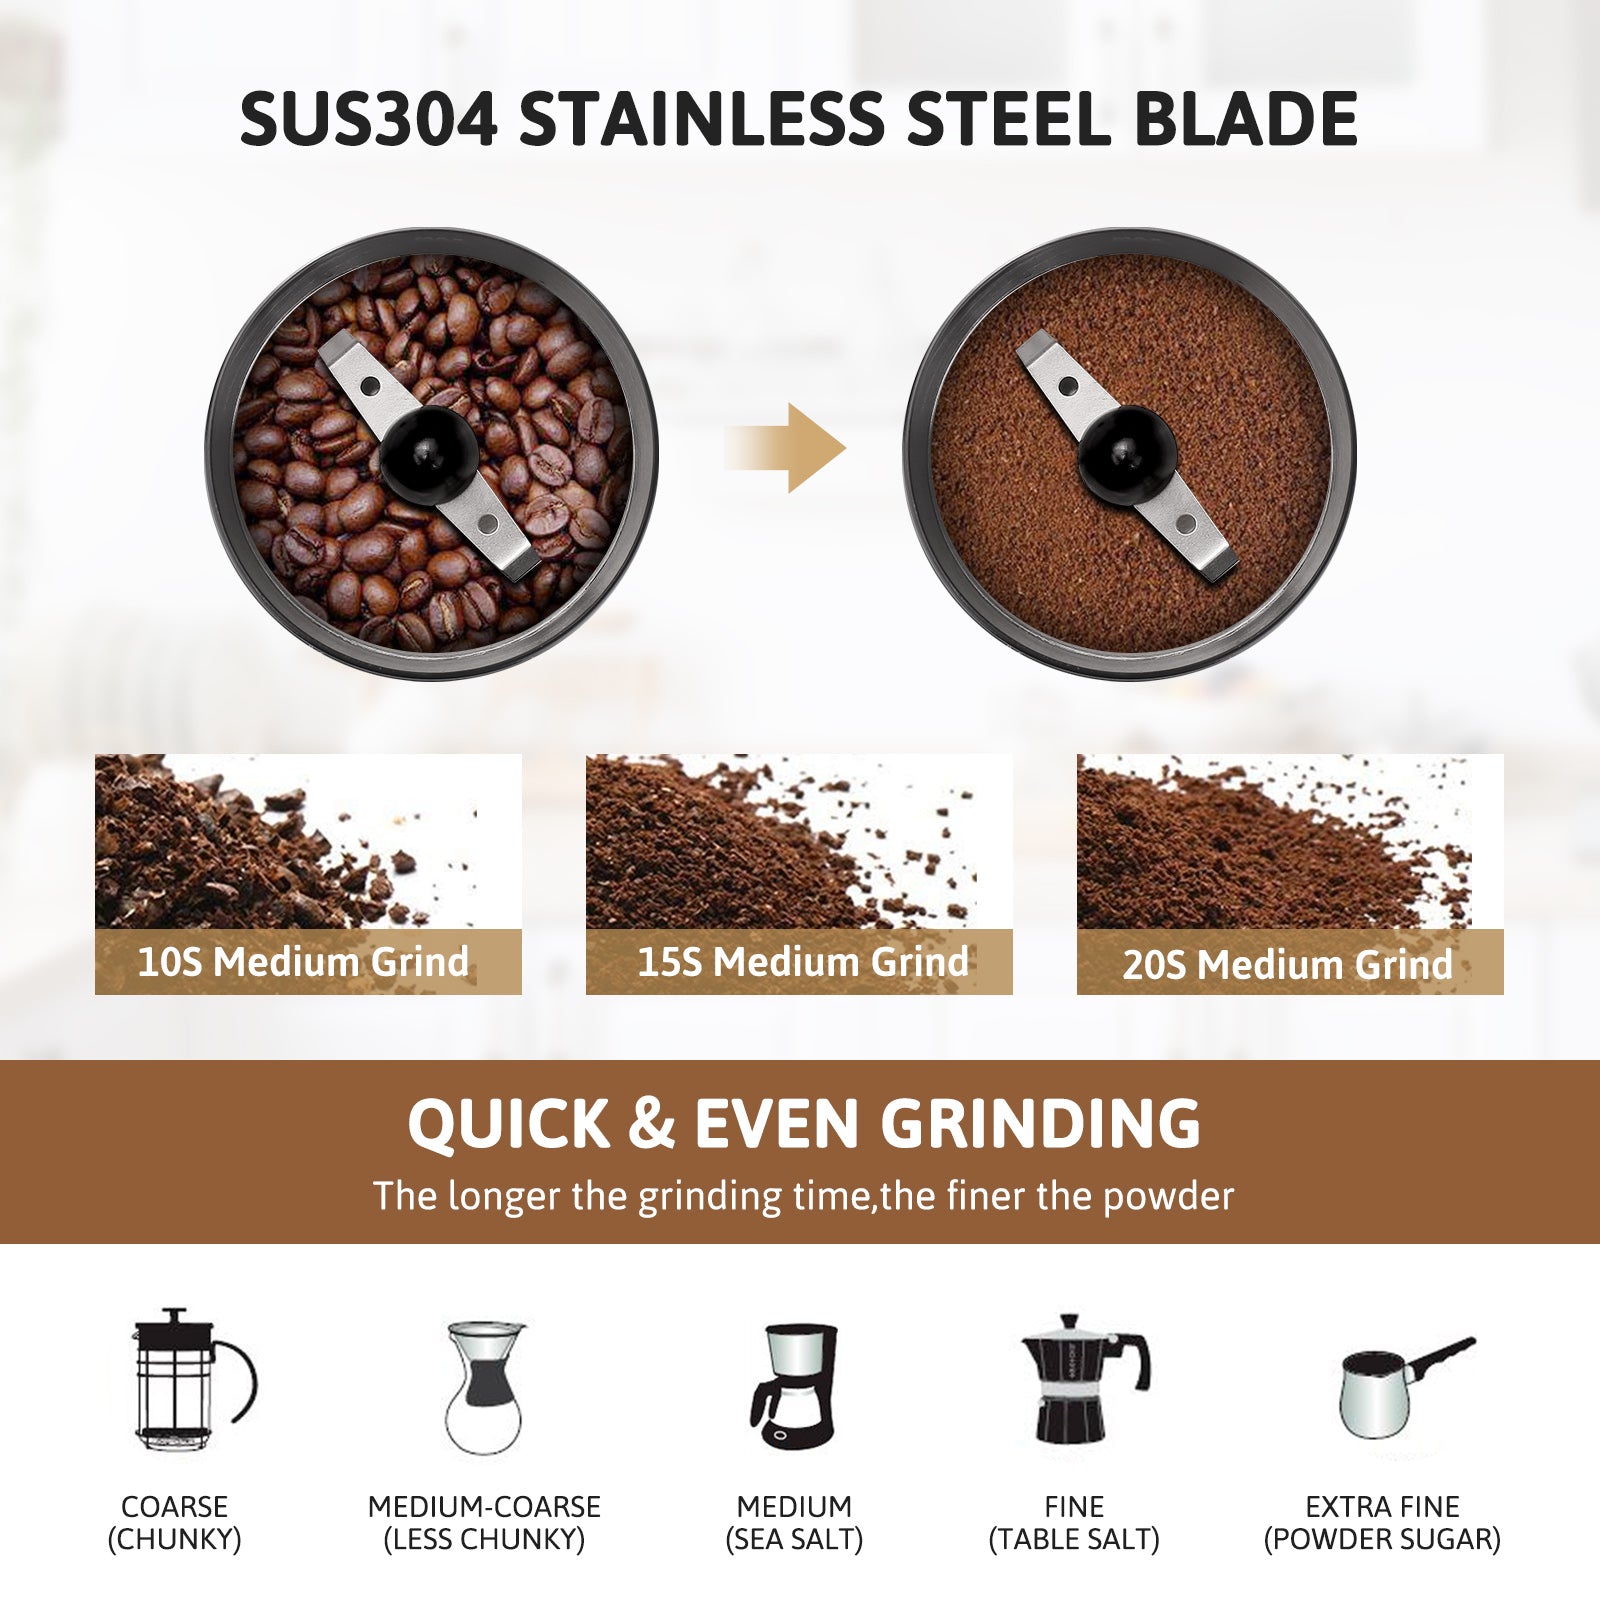 Mueller of Austra Electric Blade Style Coffee Spice Grinder 